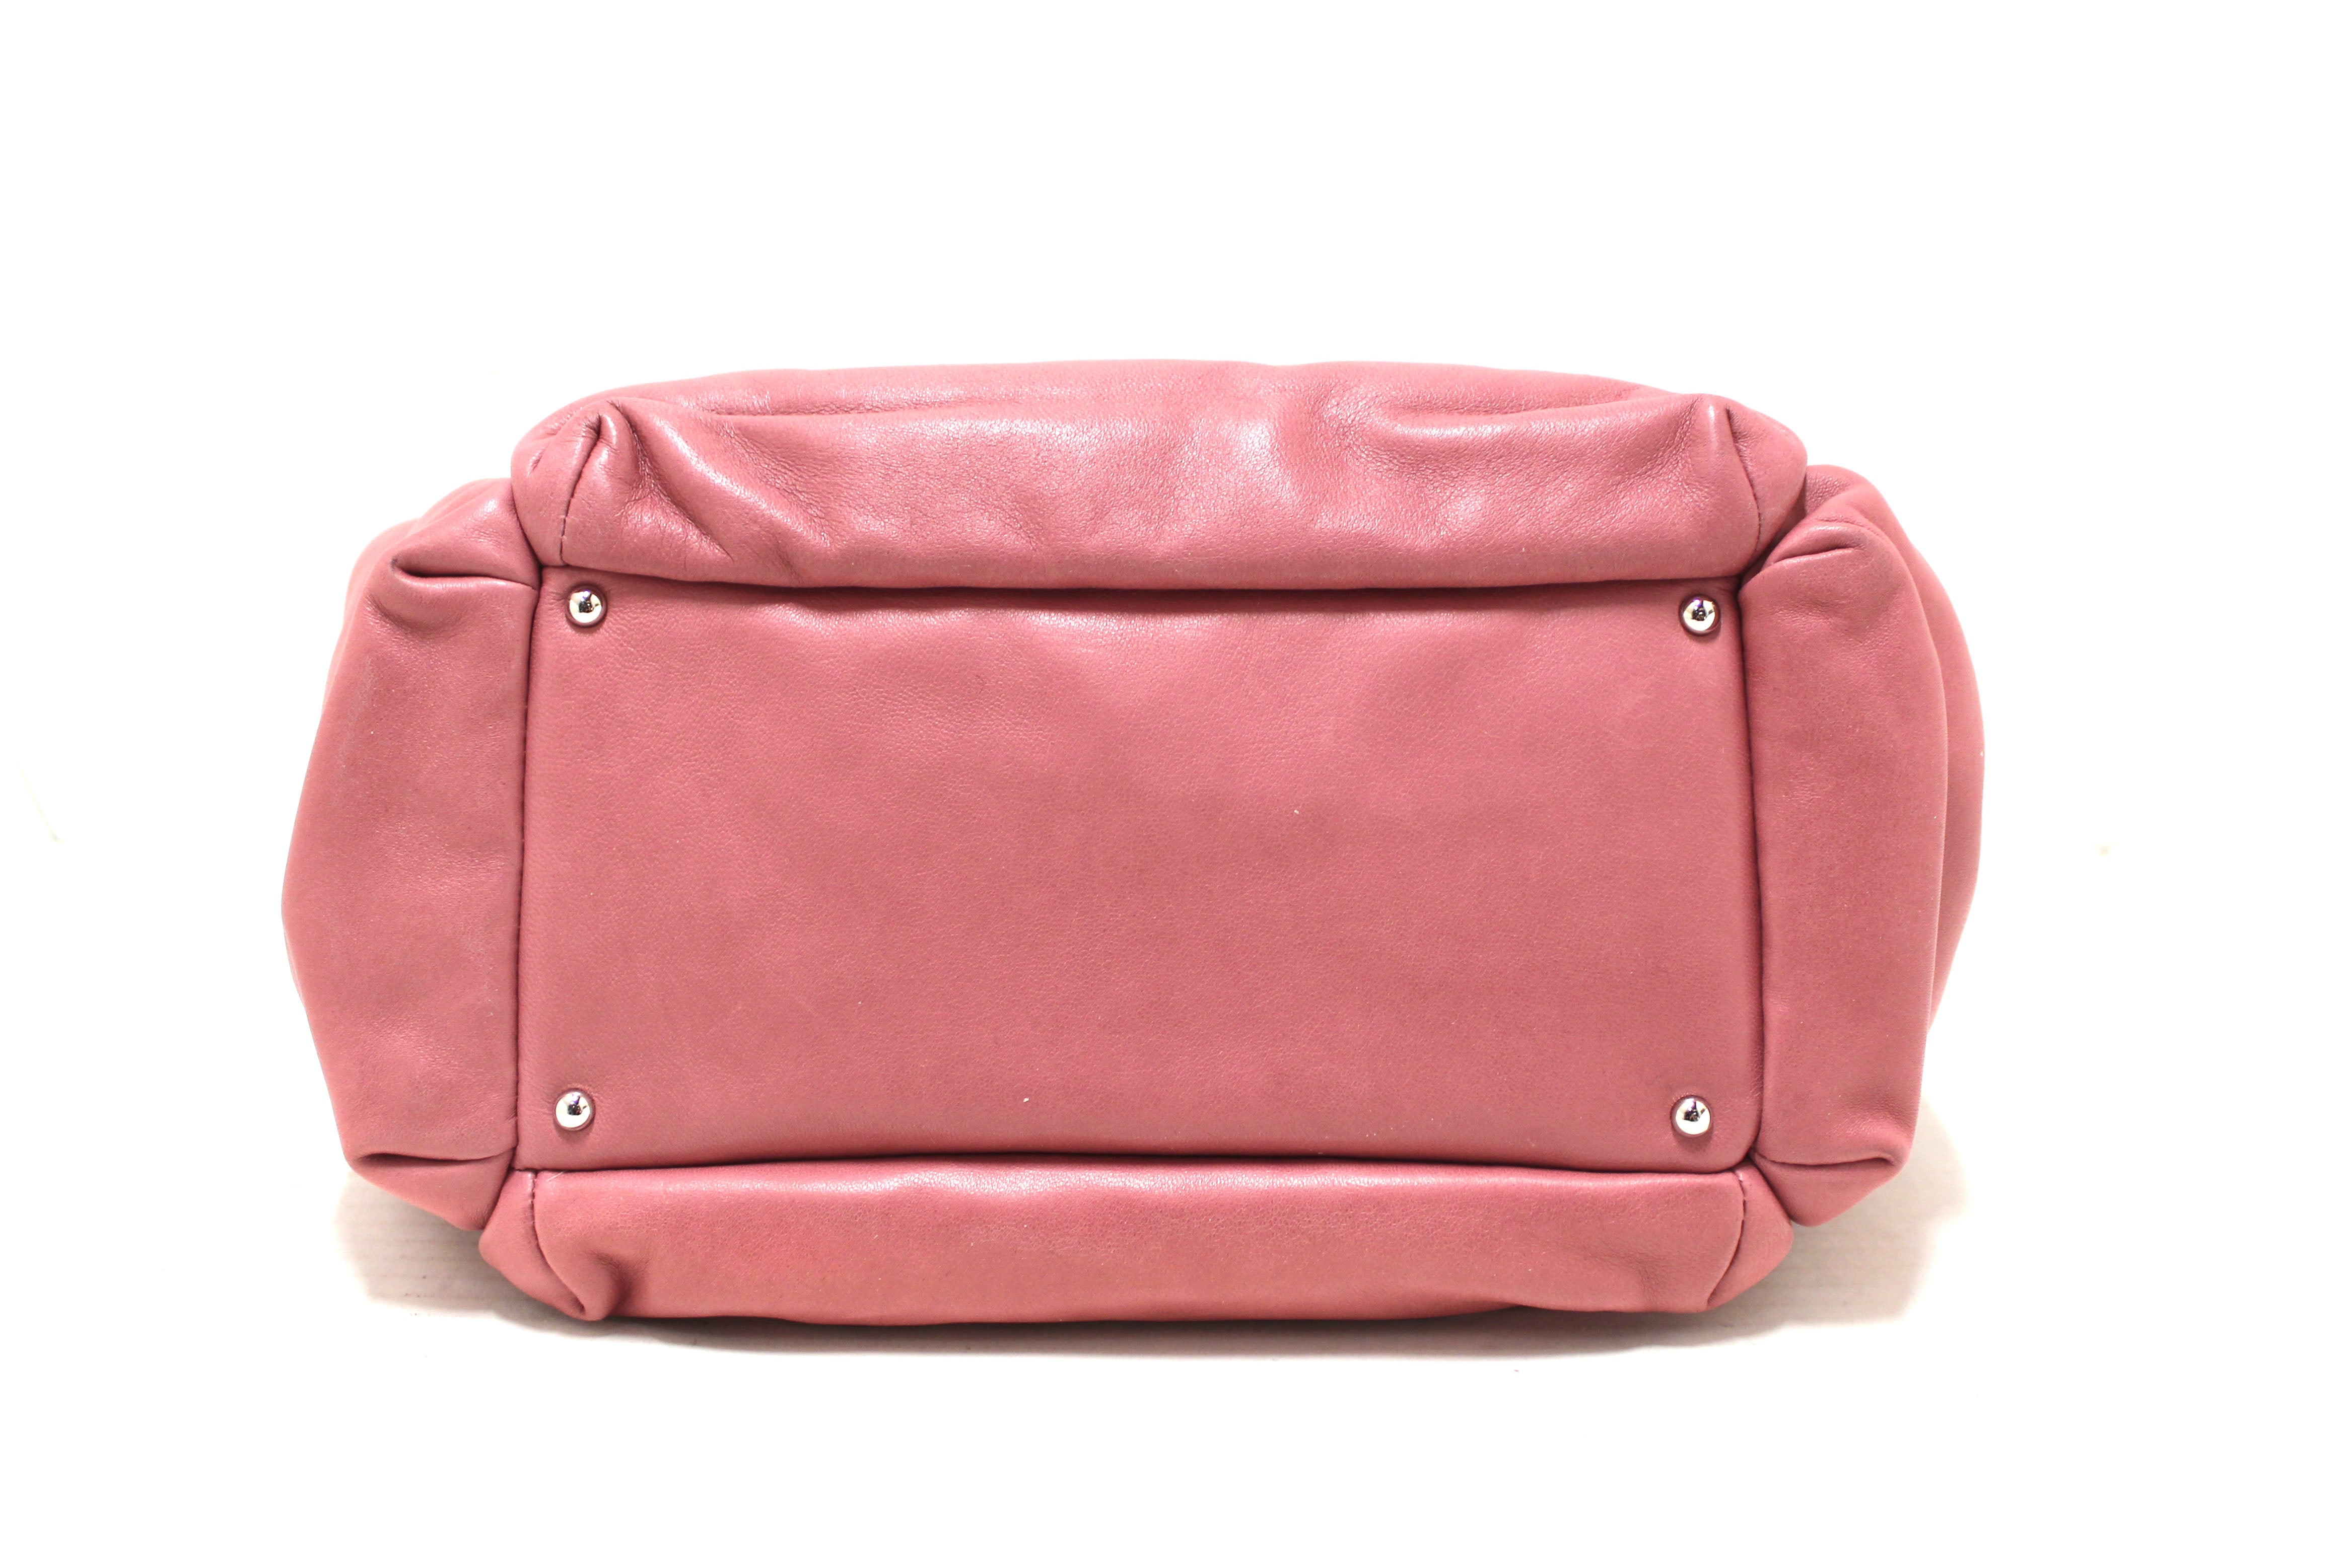 Authentic Chanel Pink Lambskin Leather Shoulder Bag